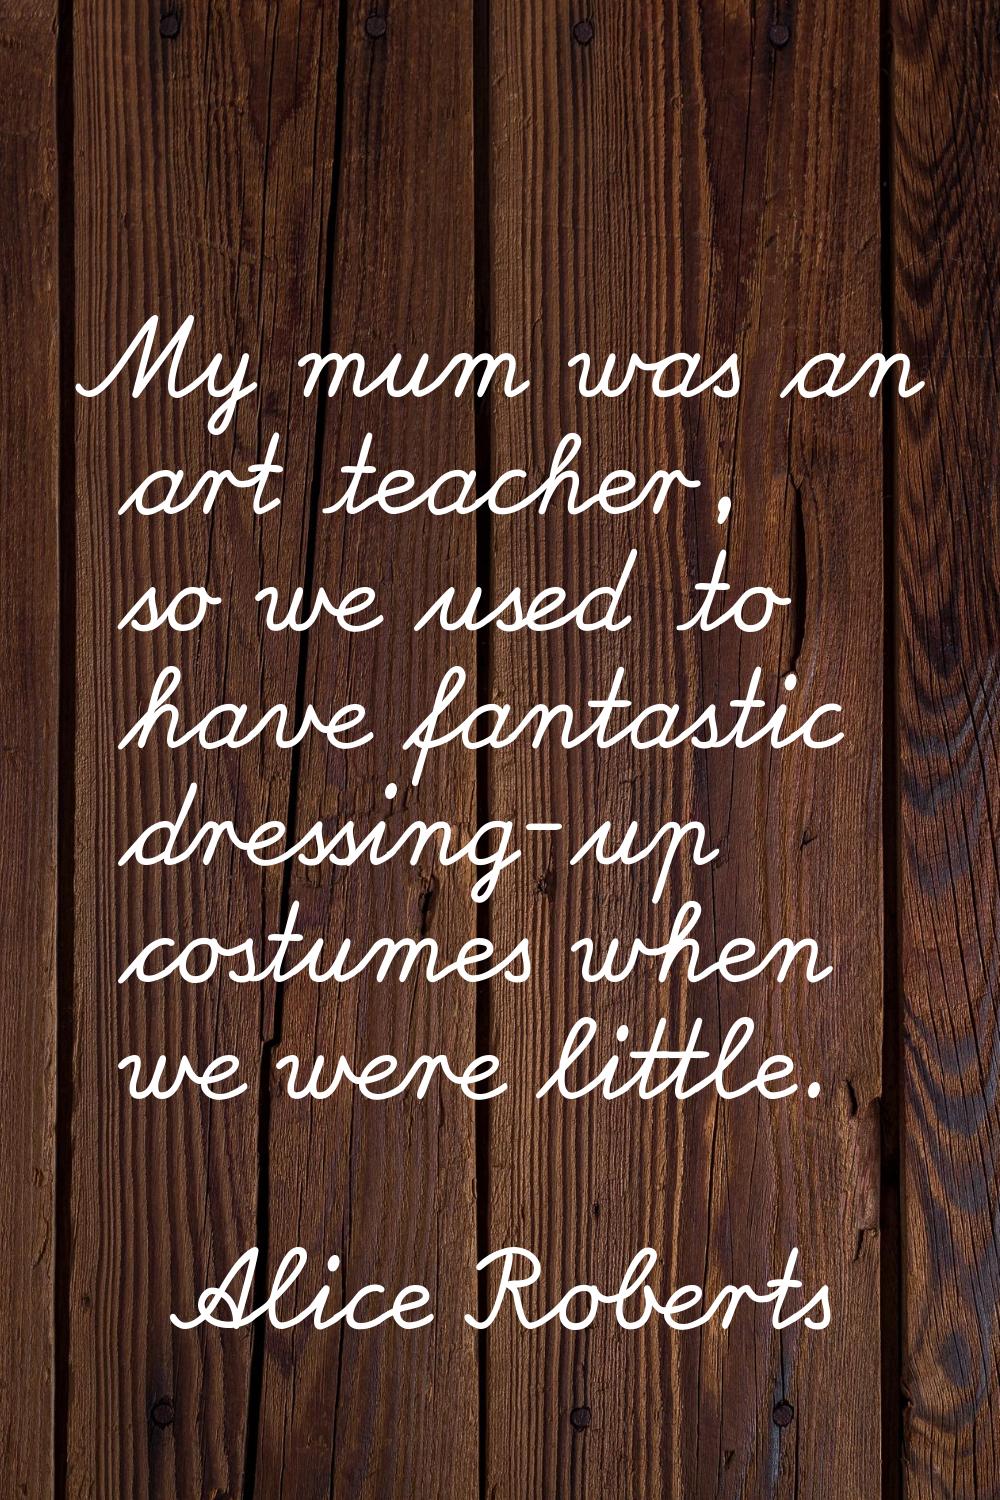 My mum was an art teacher, so we used to have fantastic dressing-up costumes when we were little.